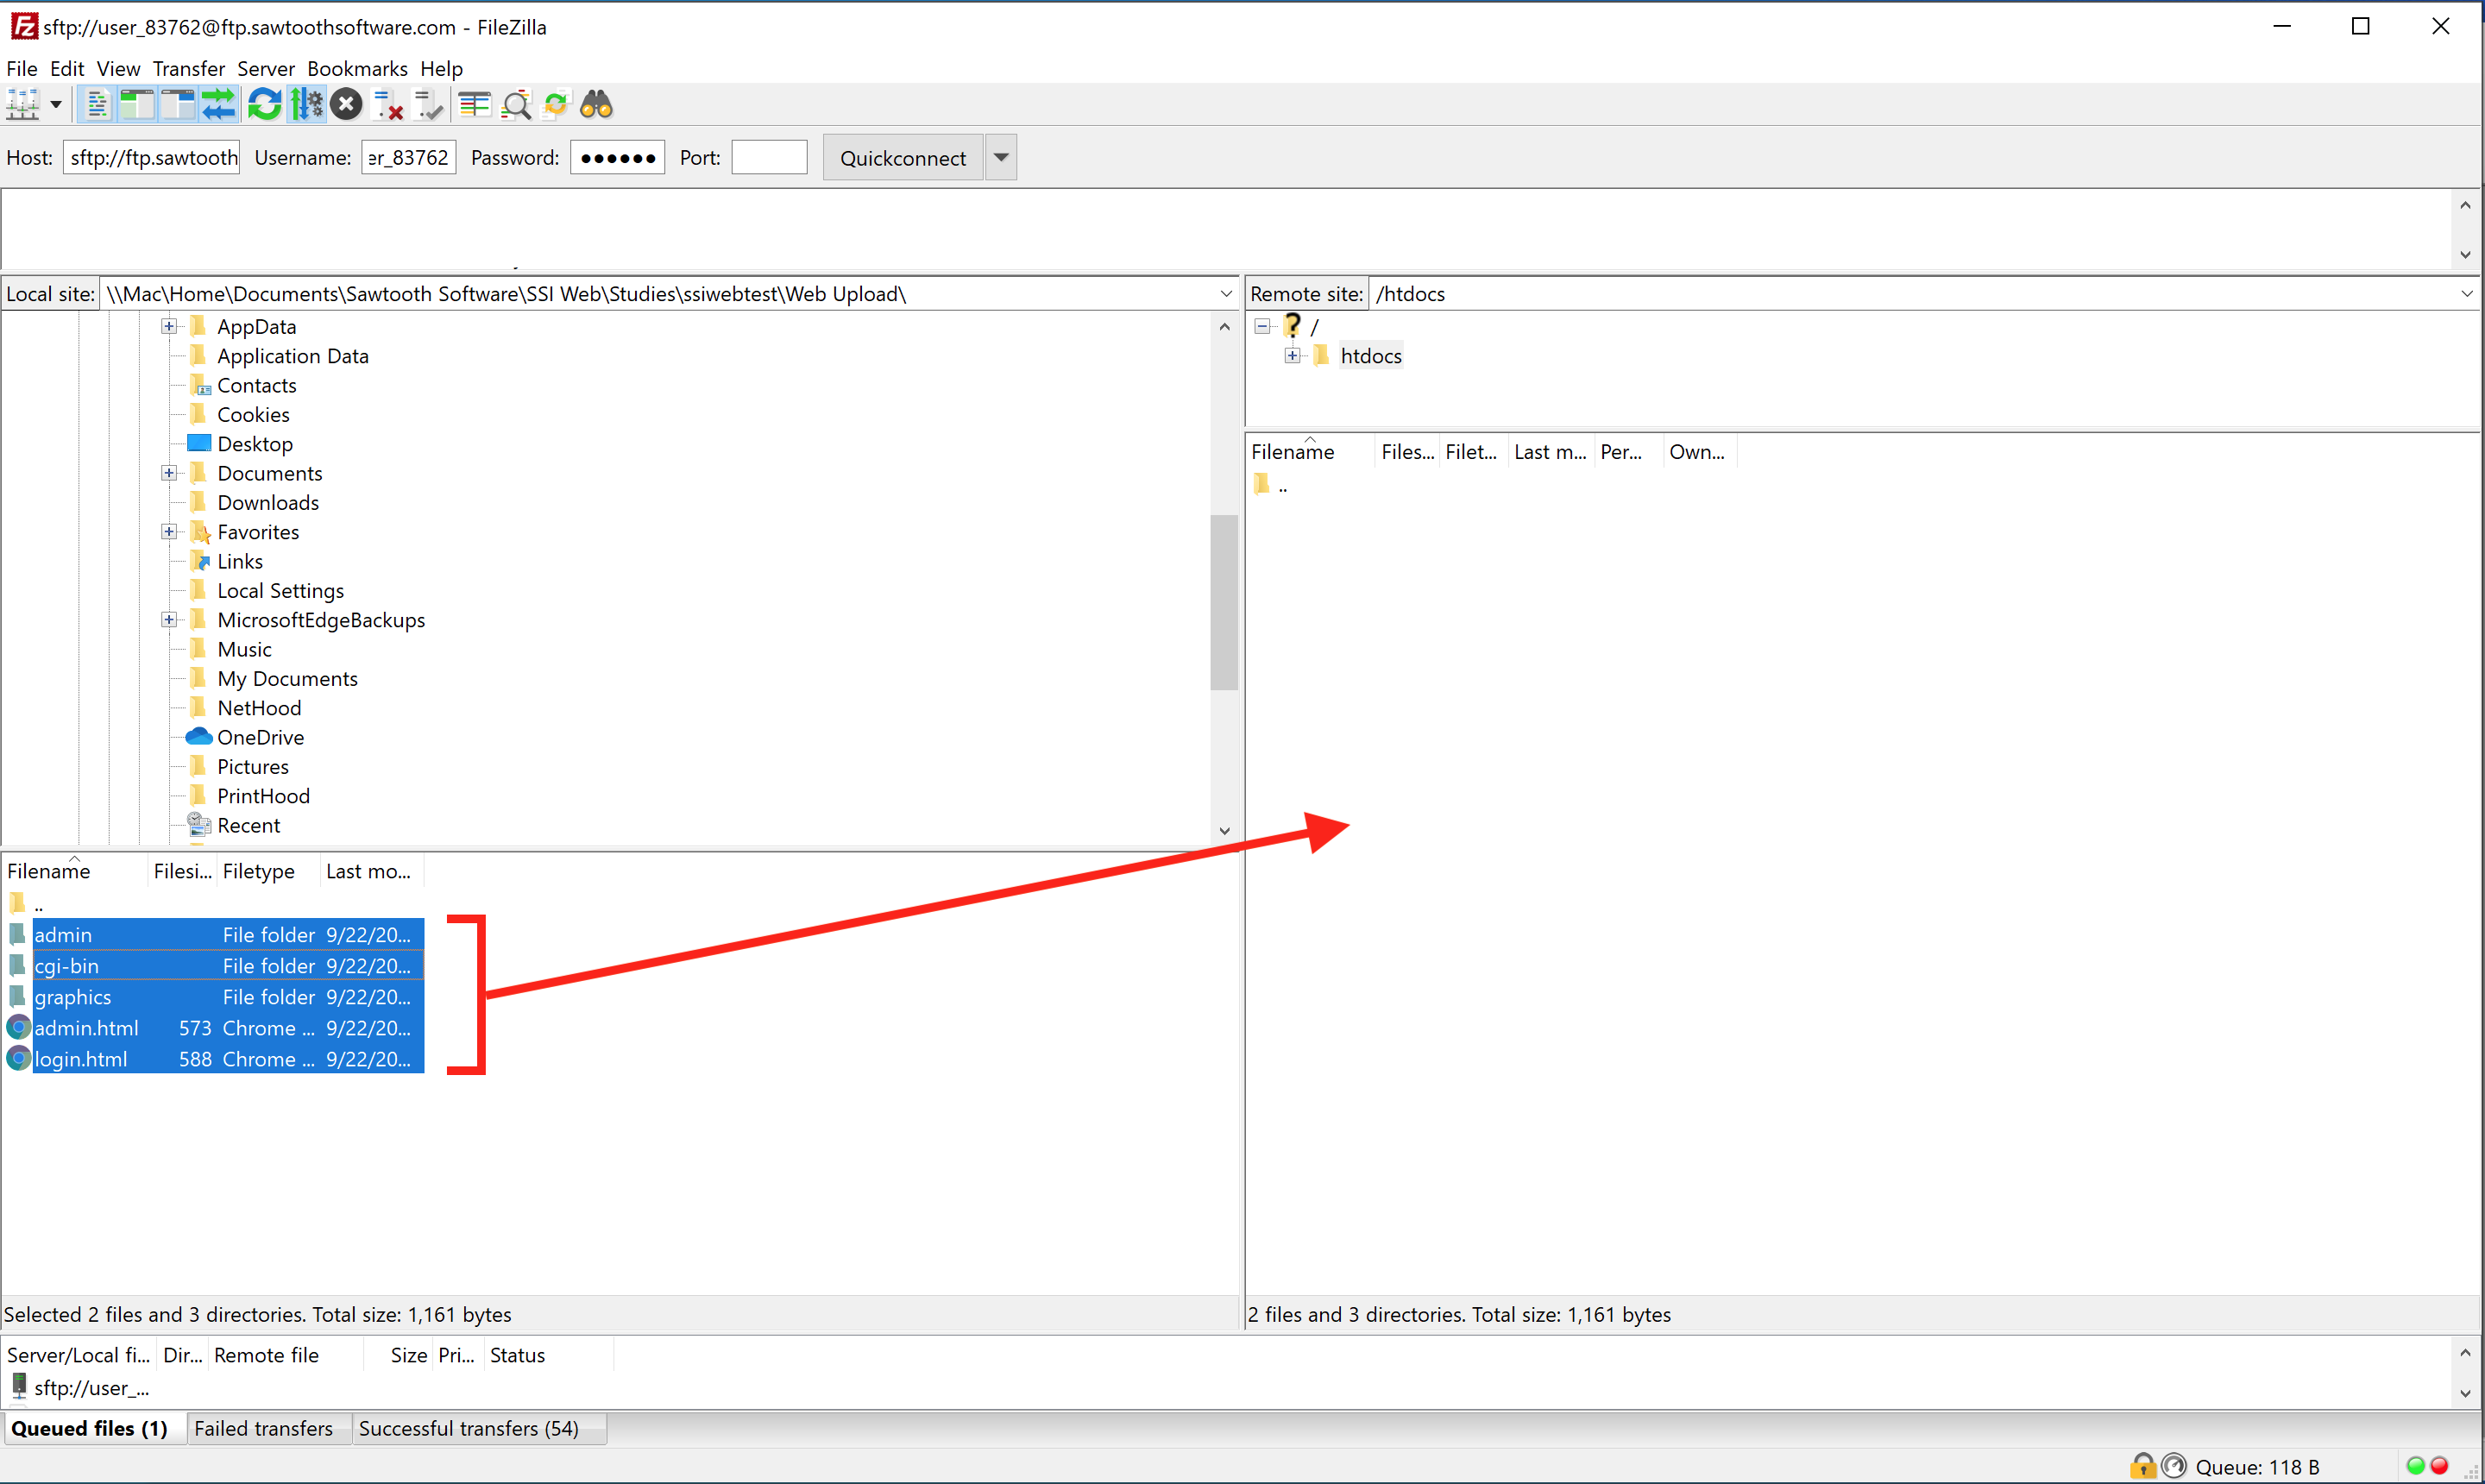 Screen Shot illustrating dragging and dropping files in the FileZilla interface.